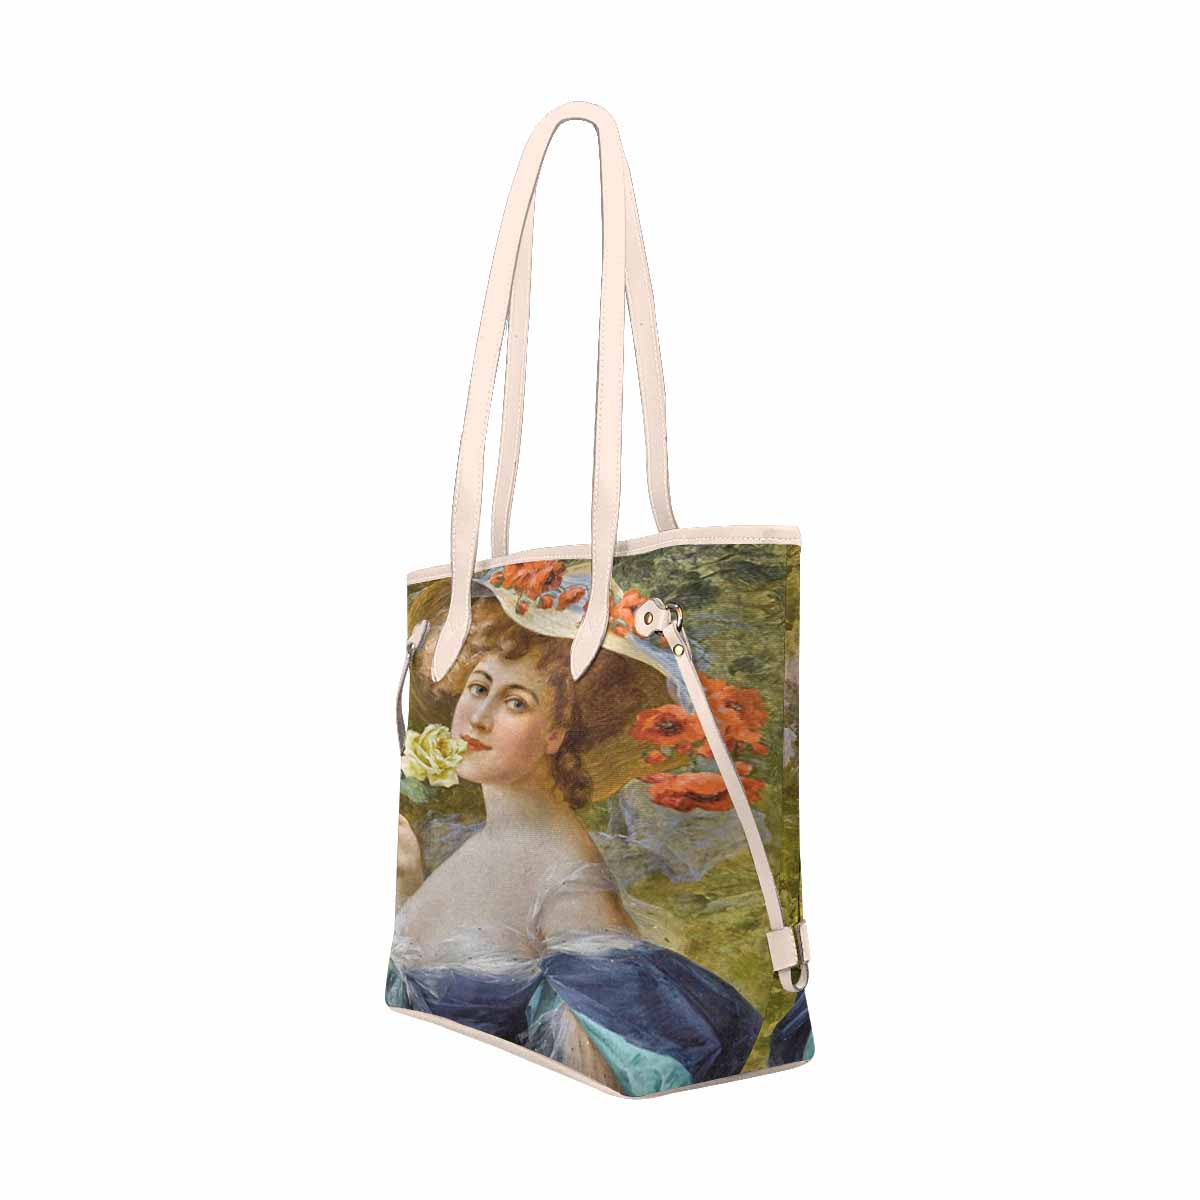 Victorian Lady Design Handbag, Model 1695361, Woman With Yellow Rose At Mouth, BEIGE/TAN TRIM